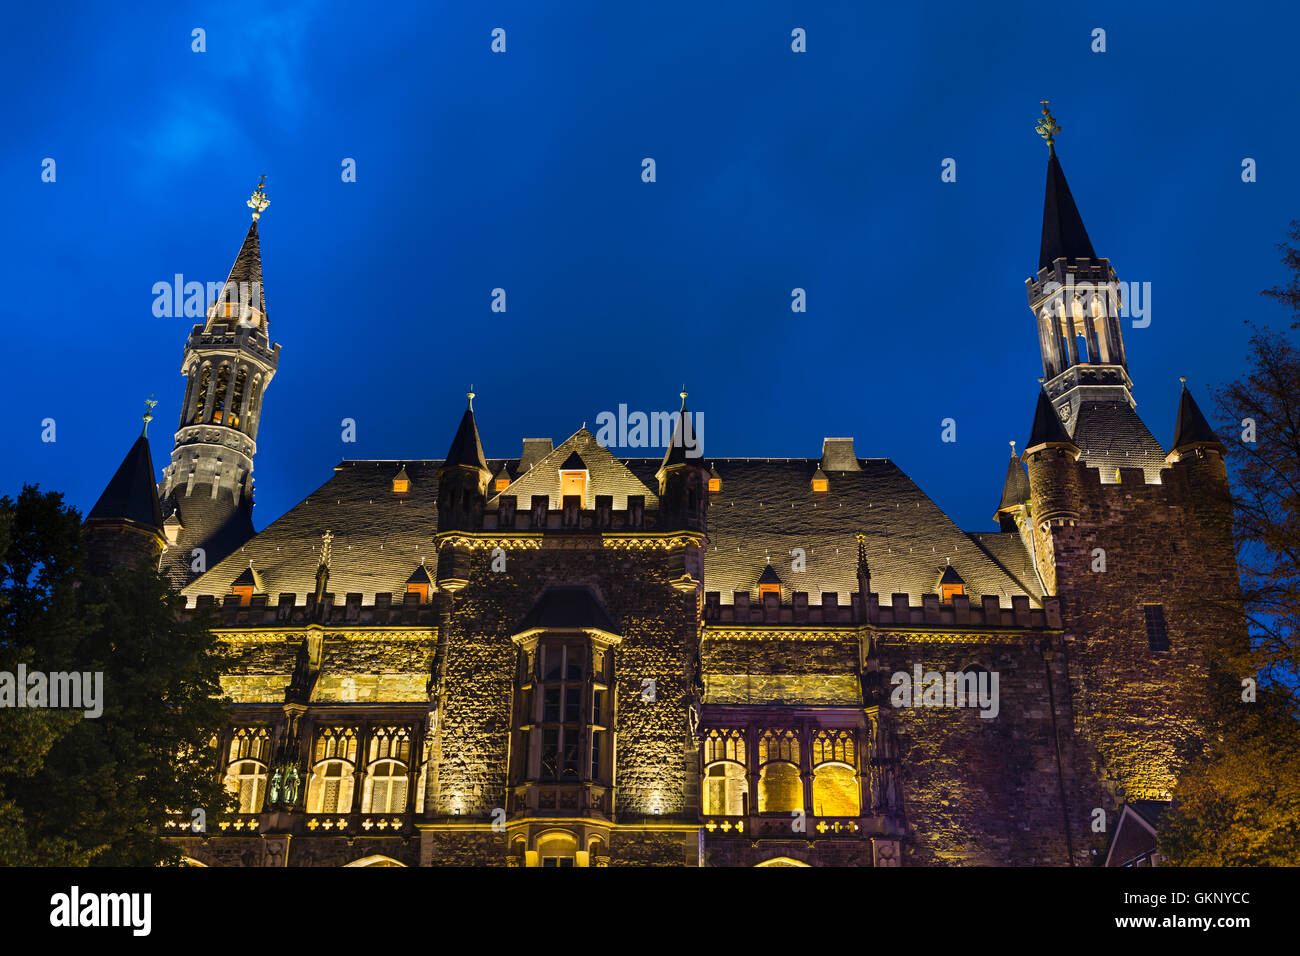 The old town hall of Aachen, Germany with night blue sky seen from the Katschhof. Stock Photo